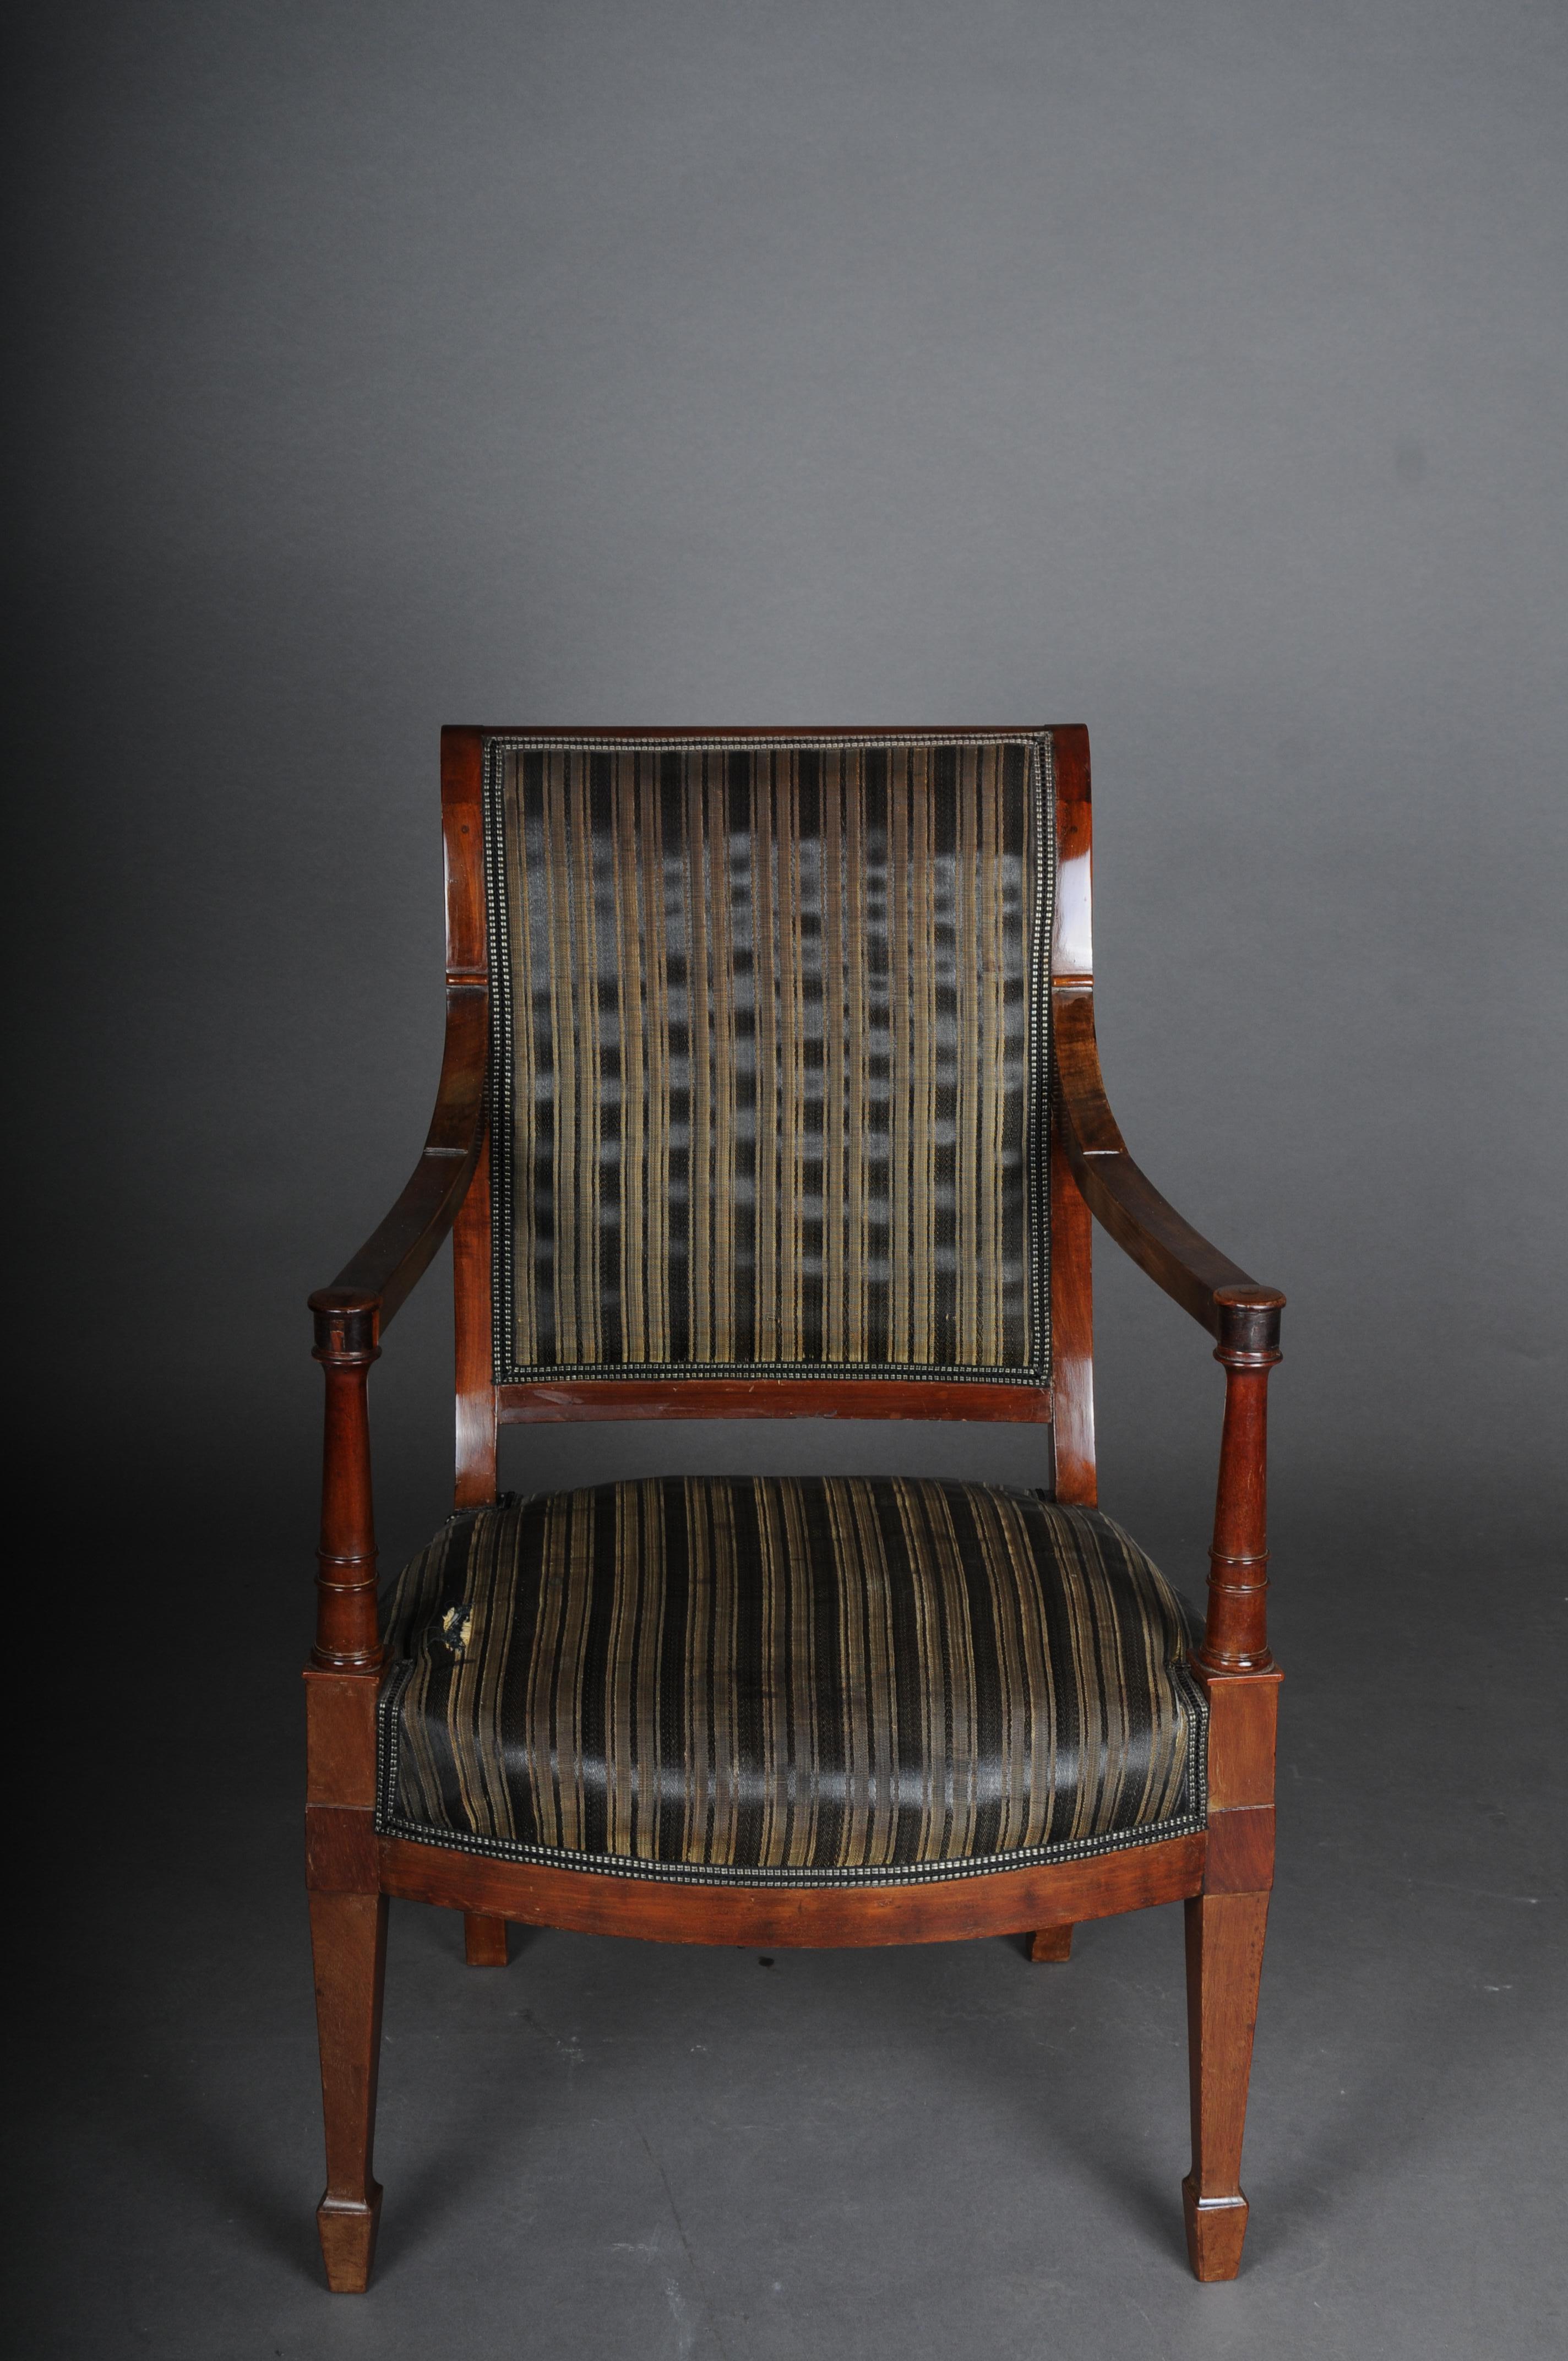 Antique Empire armchair, mahogany, around 1890.

Solid mahogany body. Back and seat upholstered and covered with a classic striped fabric cover.
Empire around 1890, France.